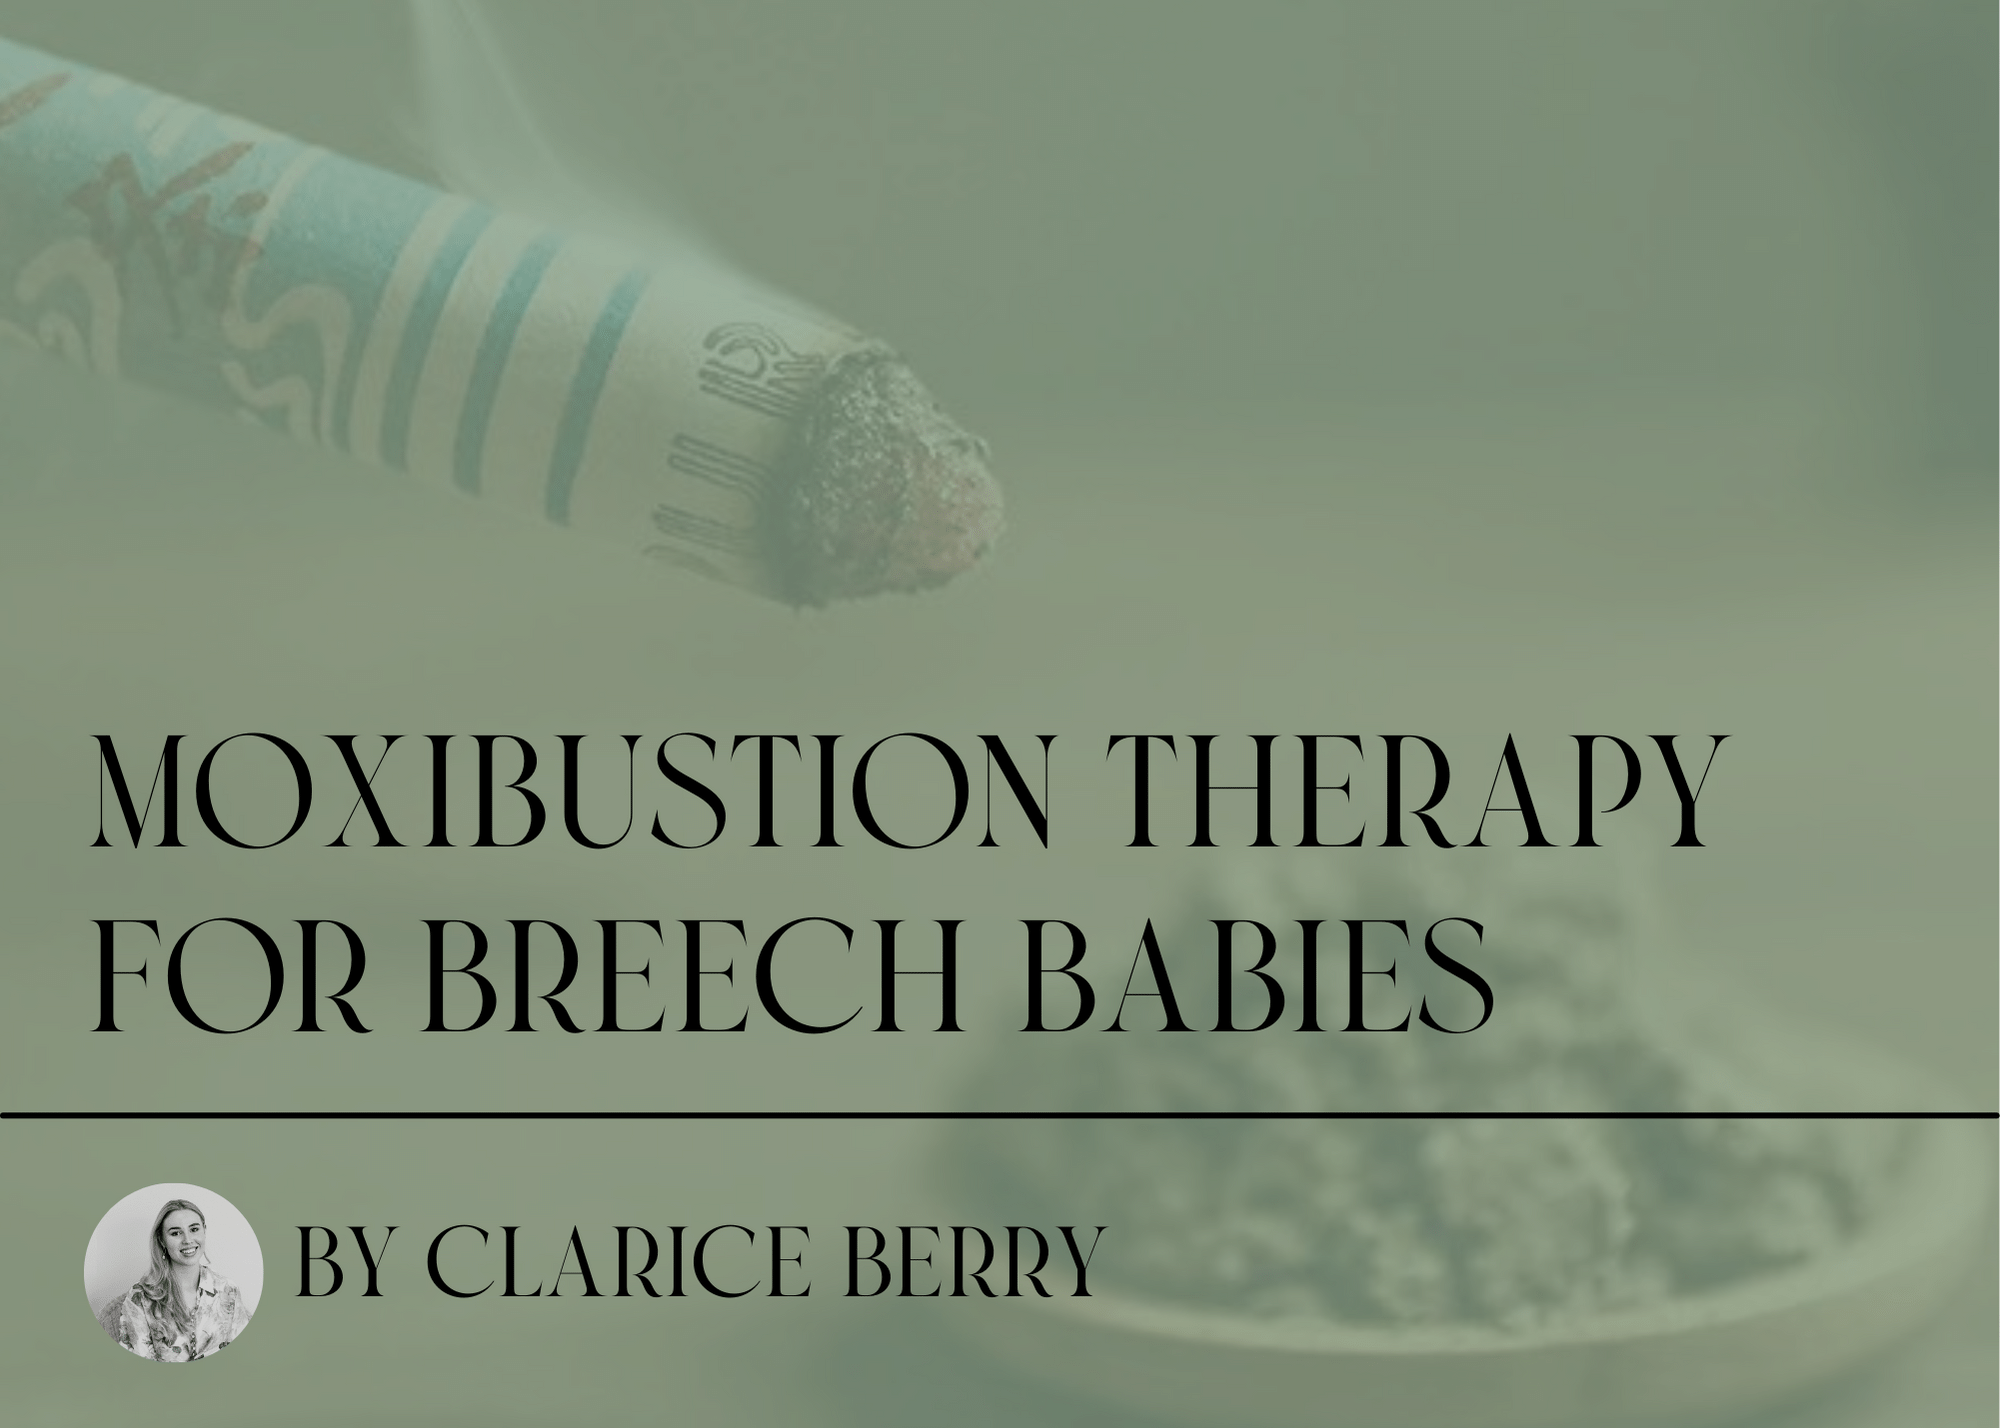 Moxibustion therapy for Breech babies